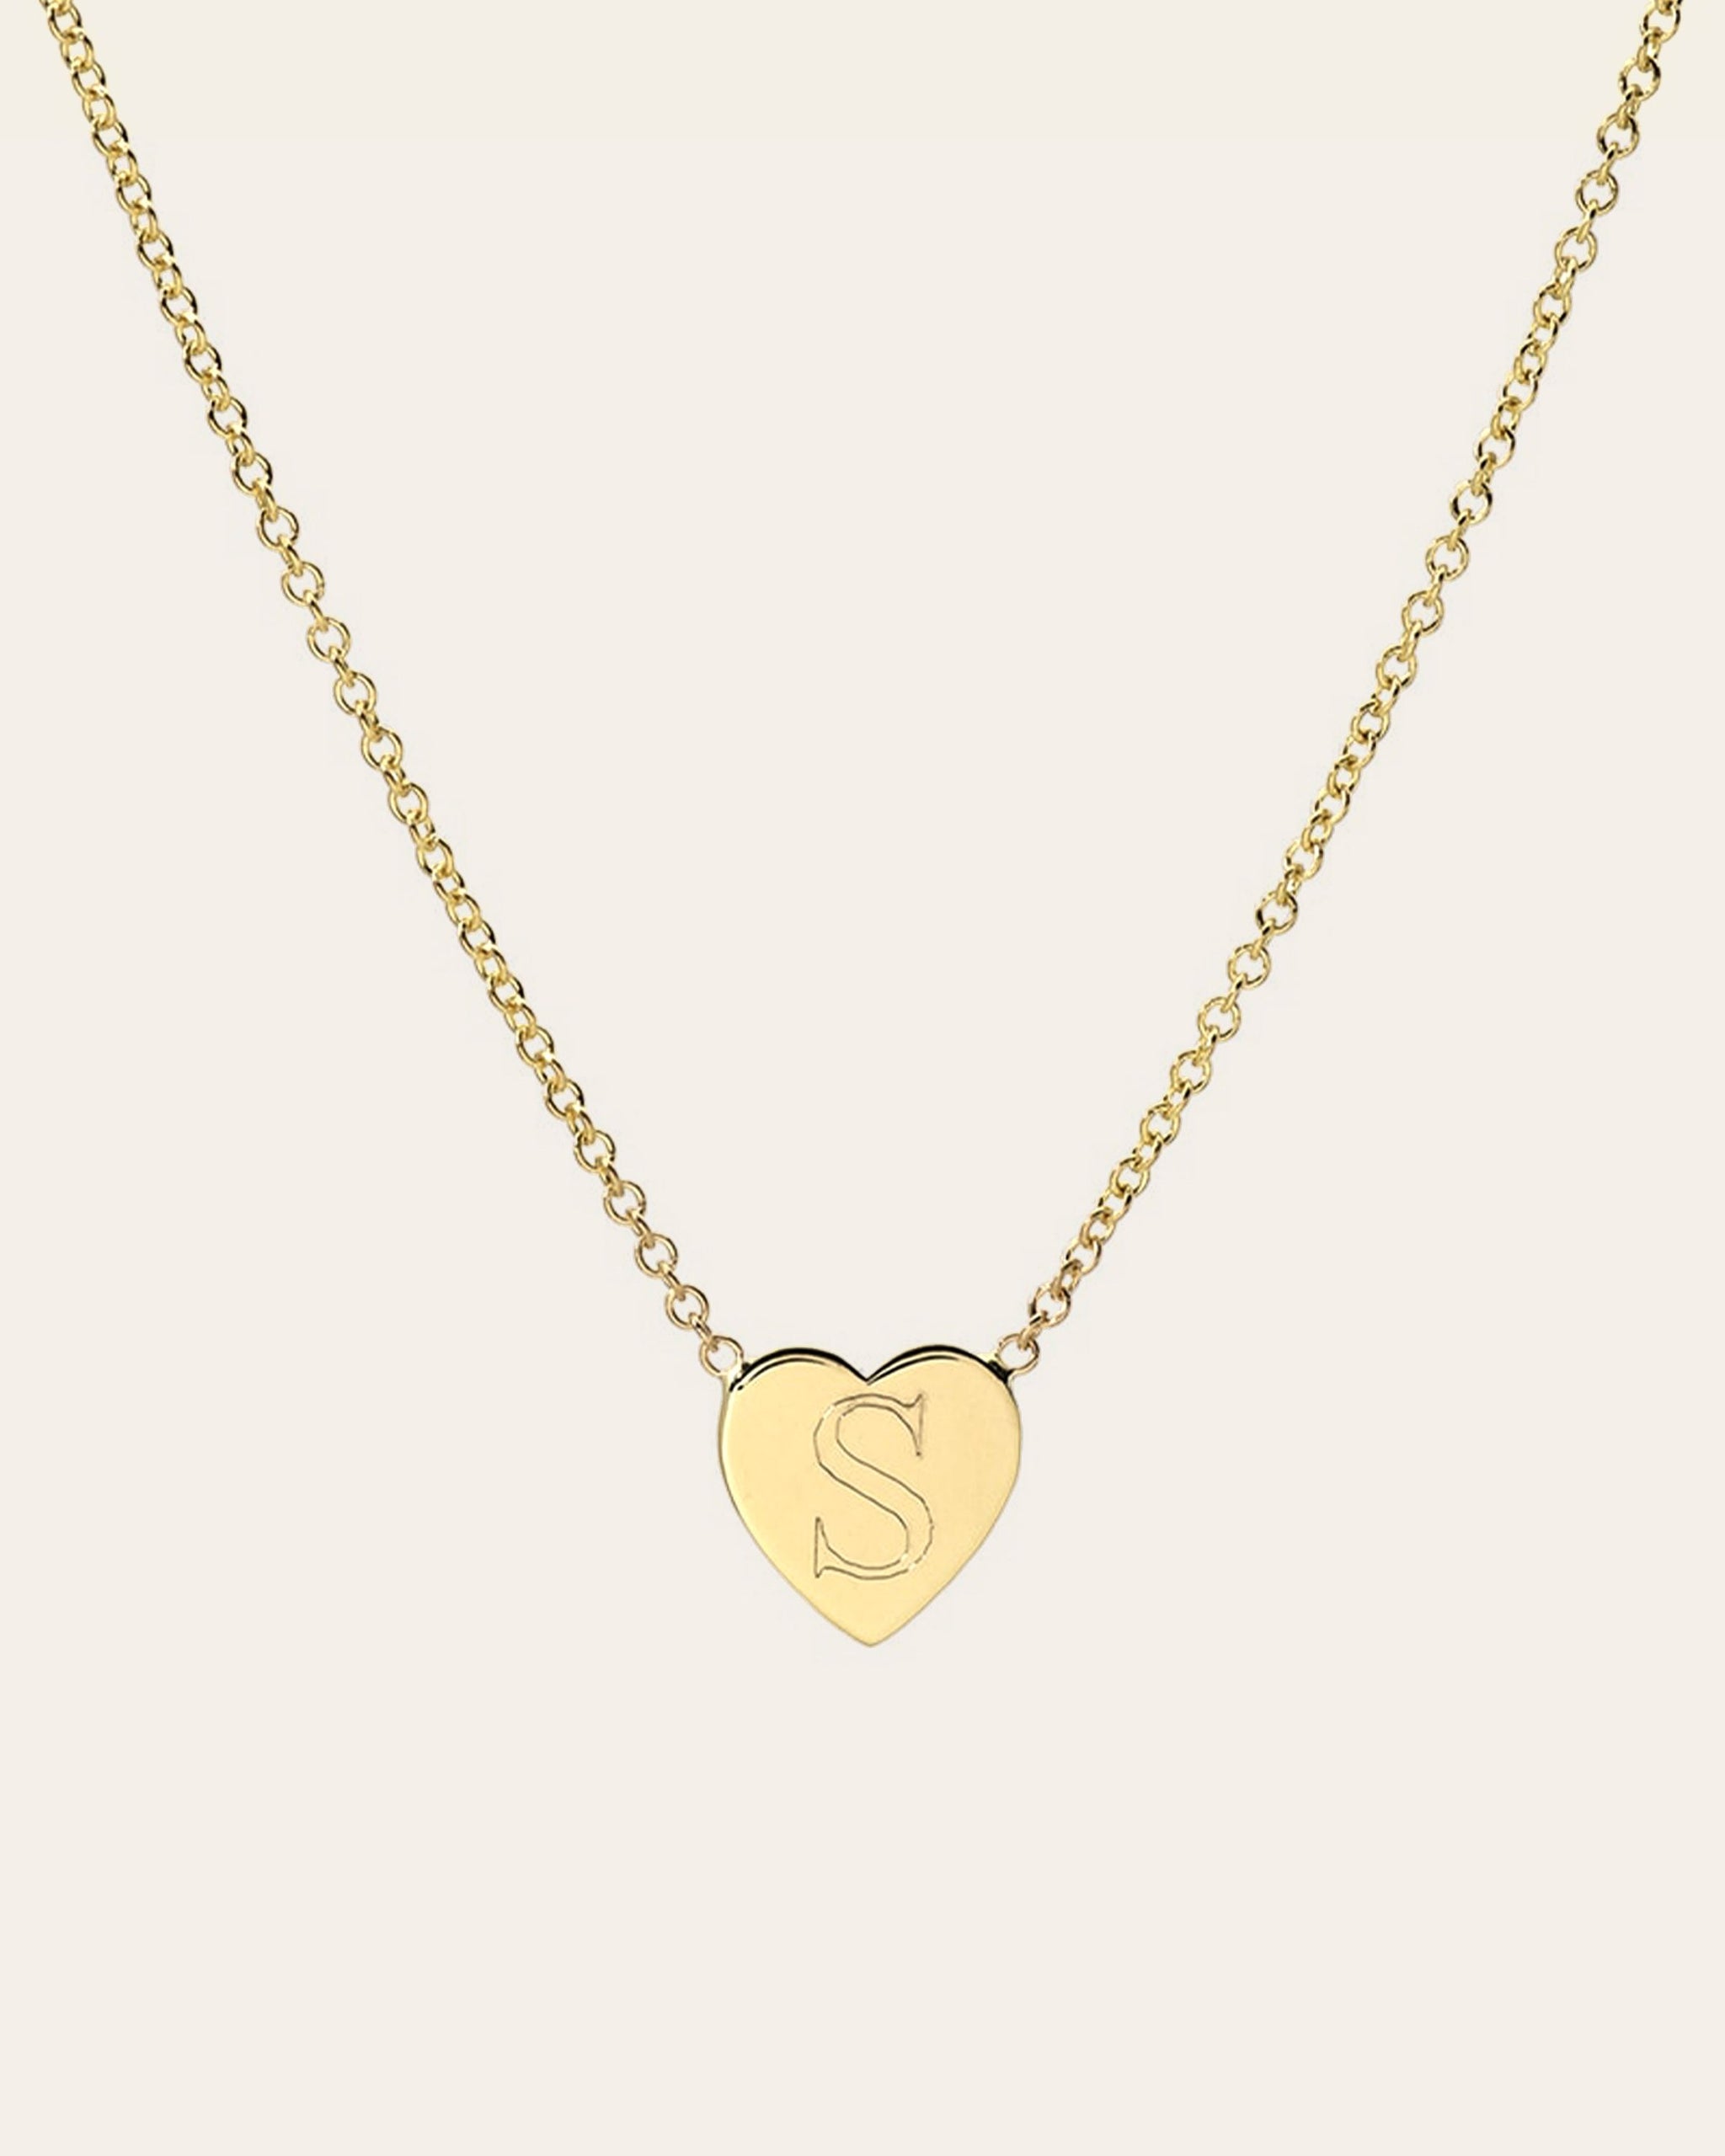 Buy Sterling Silver P Letter Heart Necklace, Silver Tiny Stamped P Initial  Heart Necklace, Stamped P Letter Charm Necklace, P Initial Necklace Online  in India - Etsy